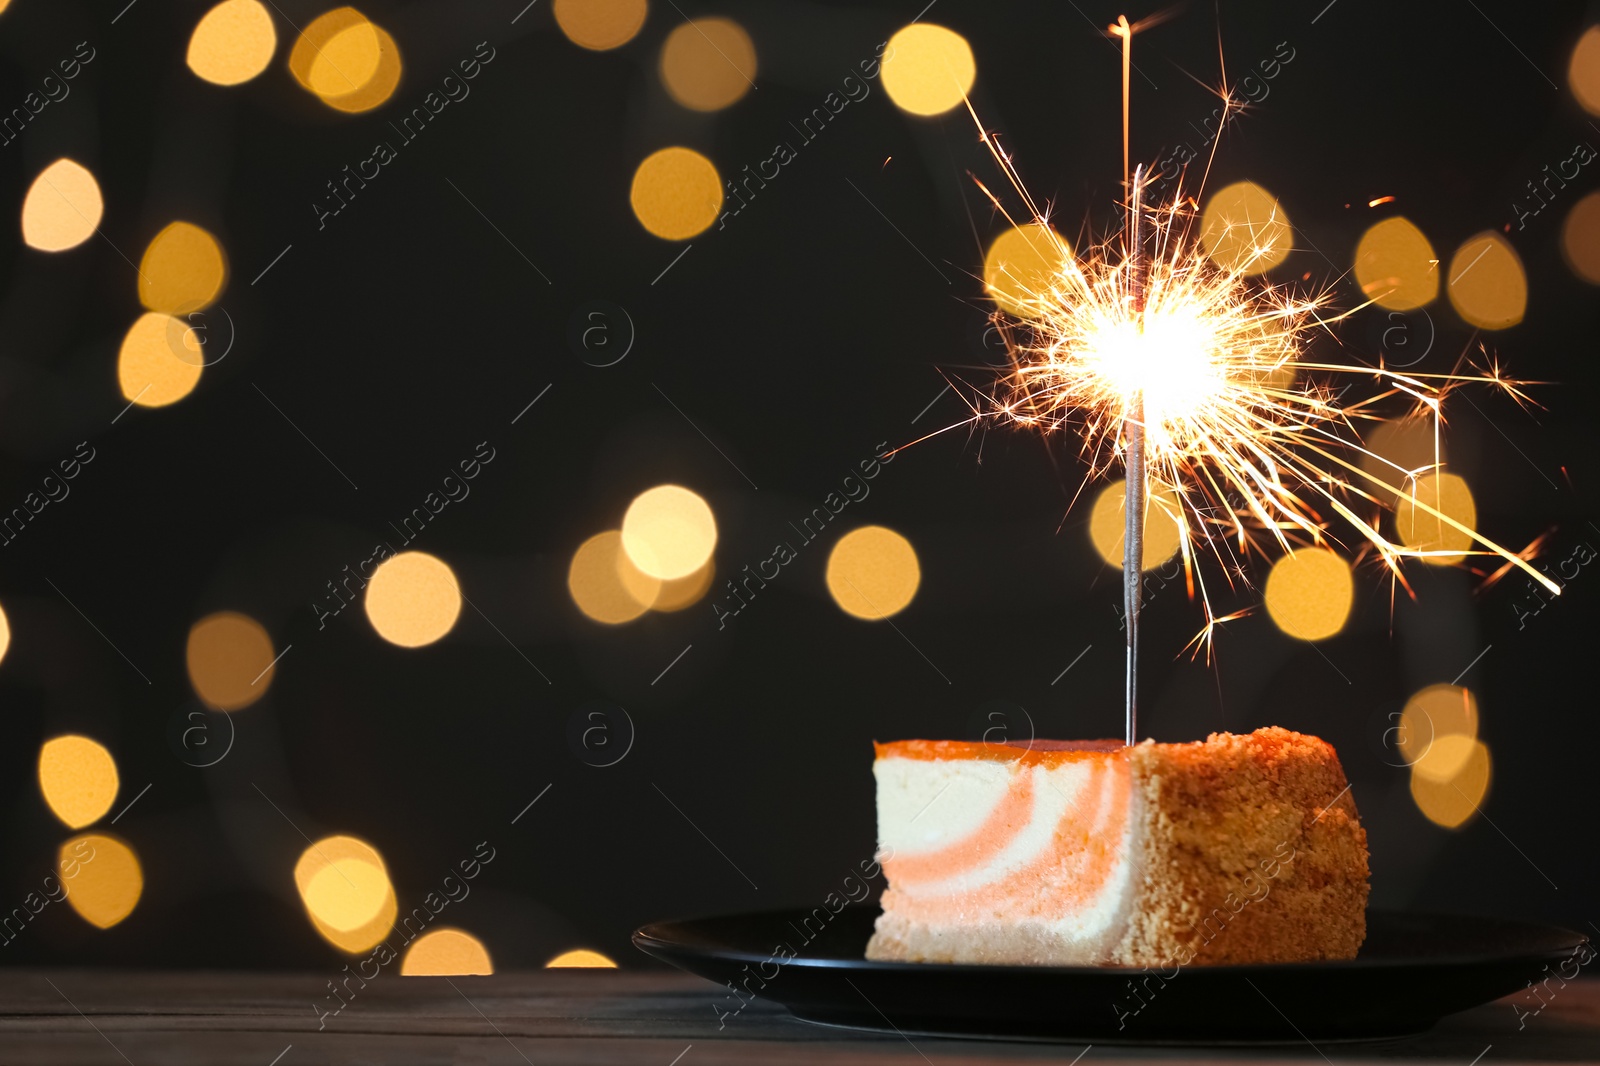 Photo of Cake with burning sparkler on black table against blurred festive lights. Space for text